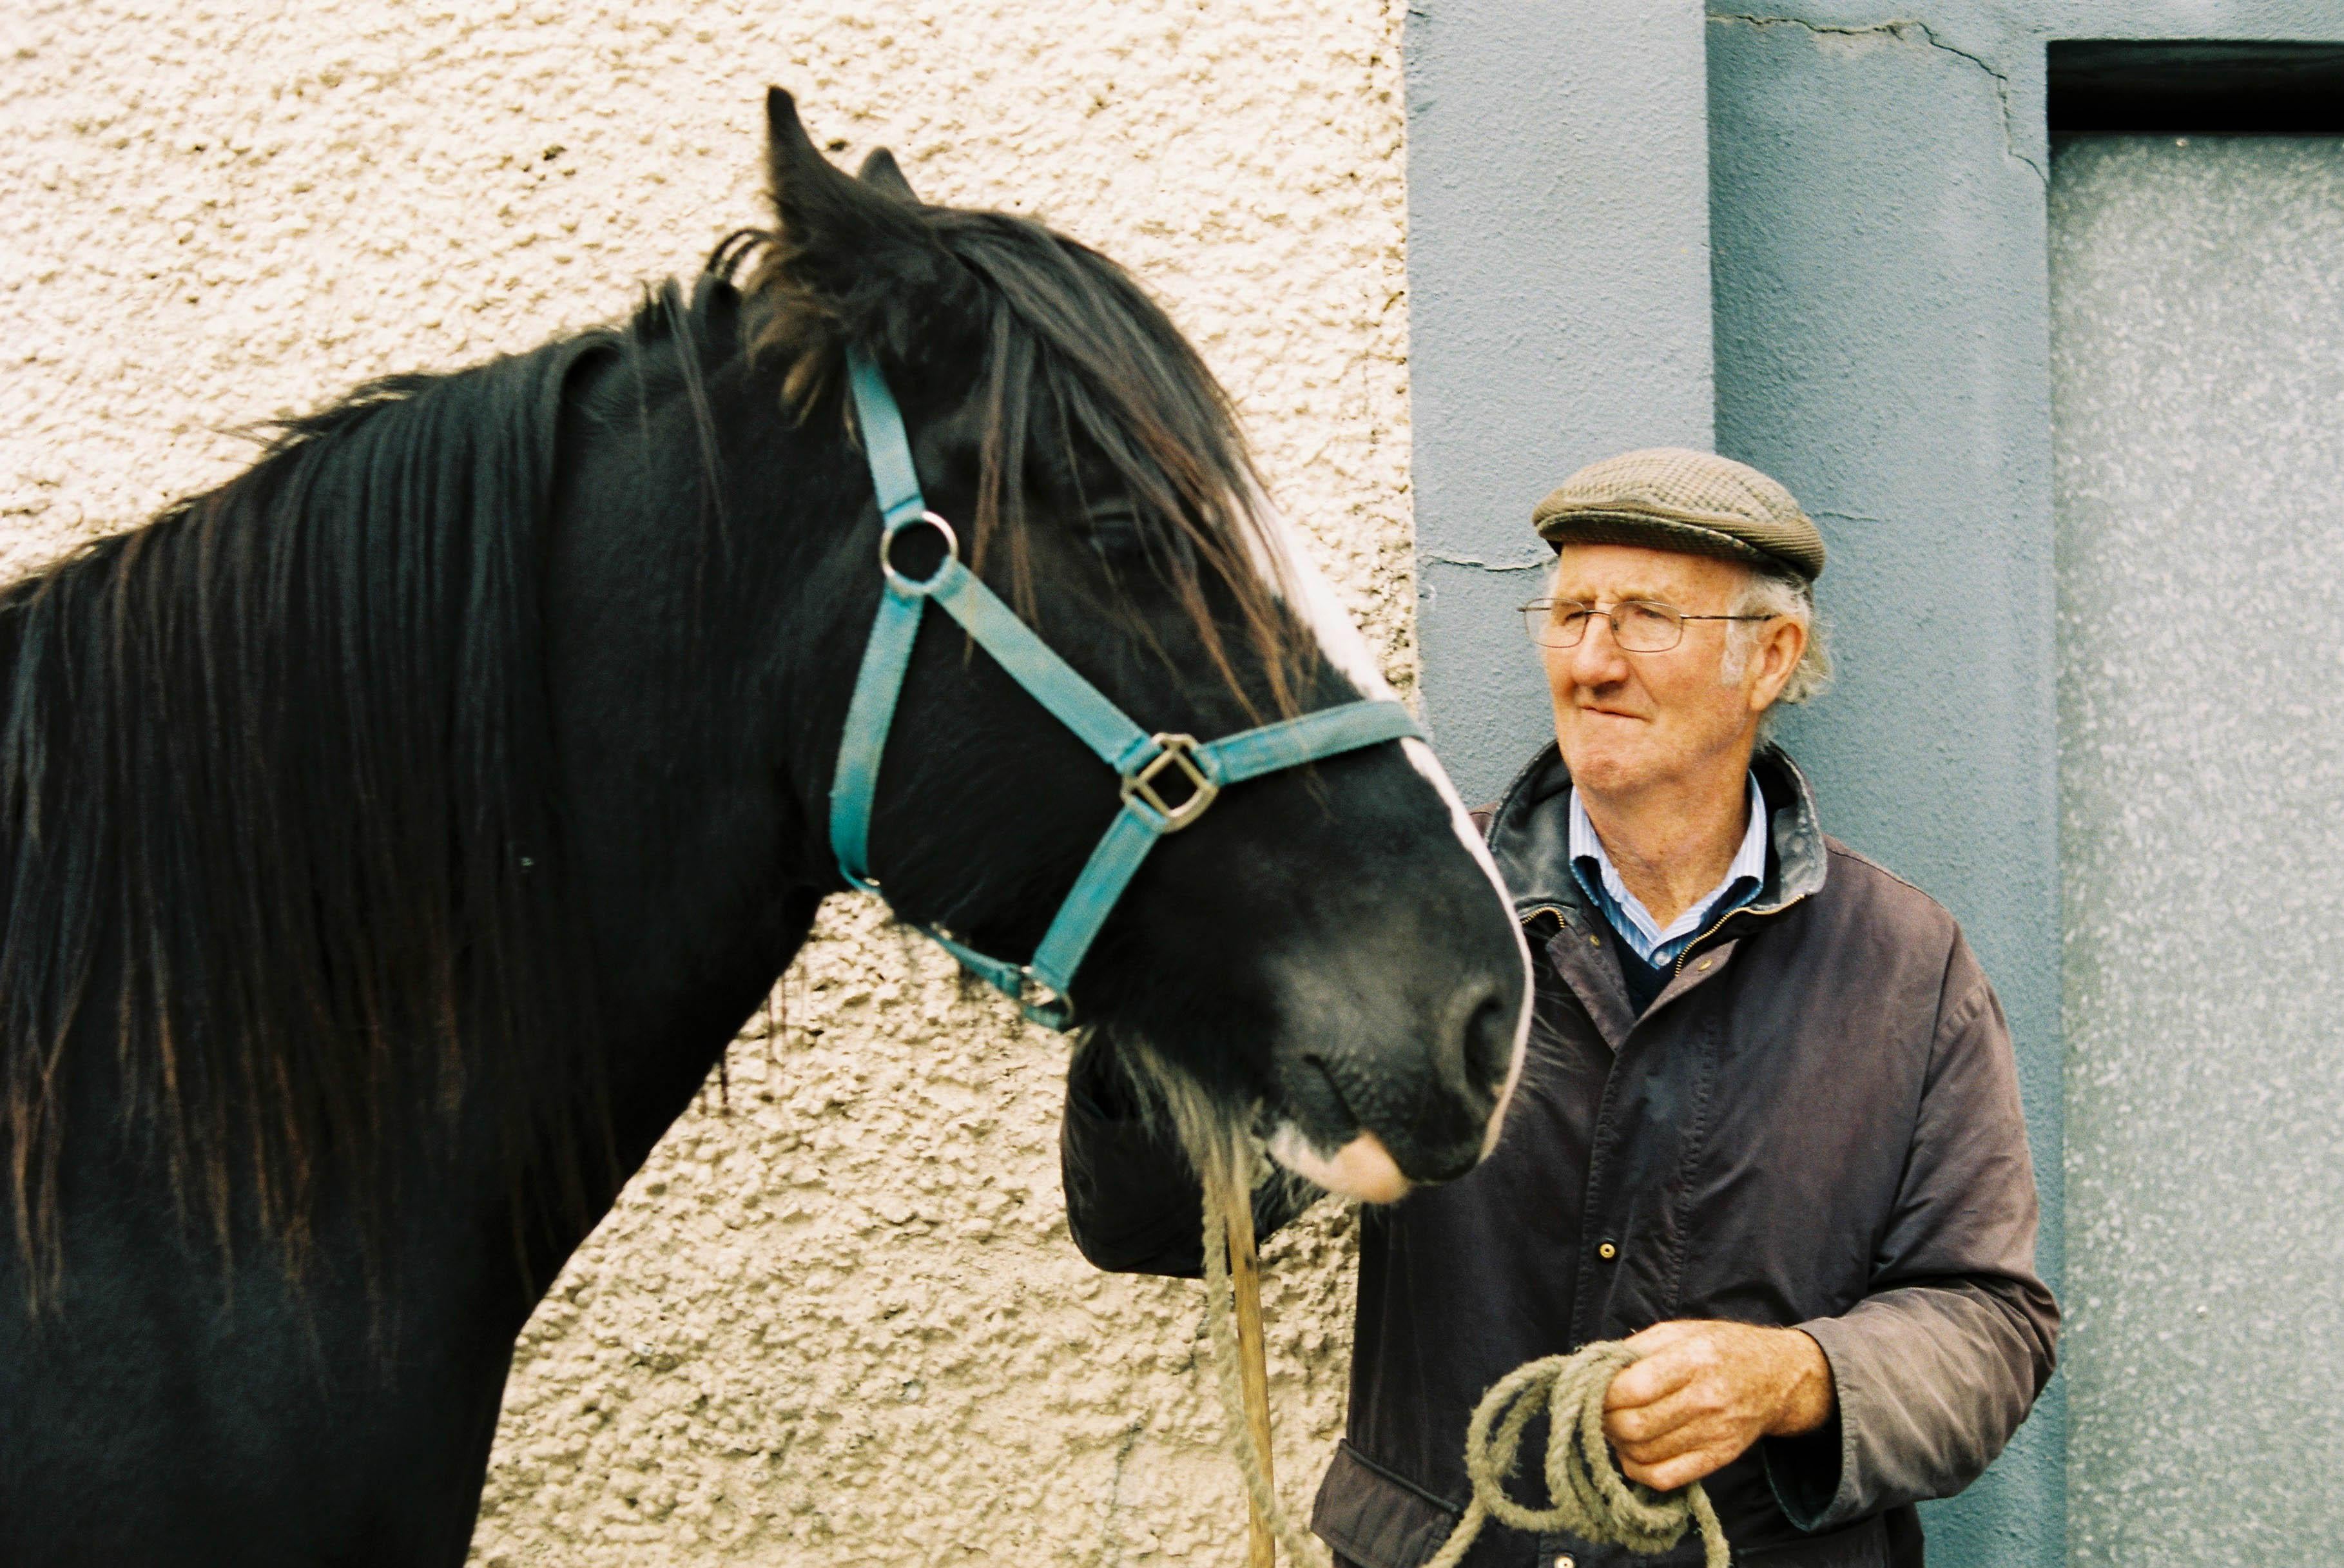 Shot on 35mm film using a Fujica 605STN. Each print will be artist-signed and posted from Dublin, Ireland with Certificate of Authentication.

This is part of a series shot at Ballinasloe horse fair, the oldest horse fair in Europe and the largest